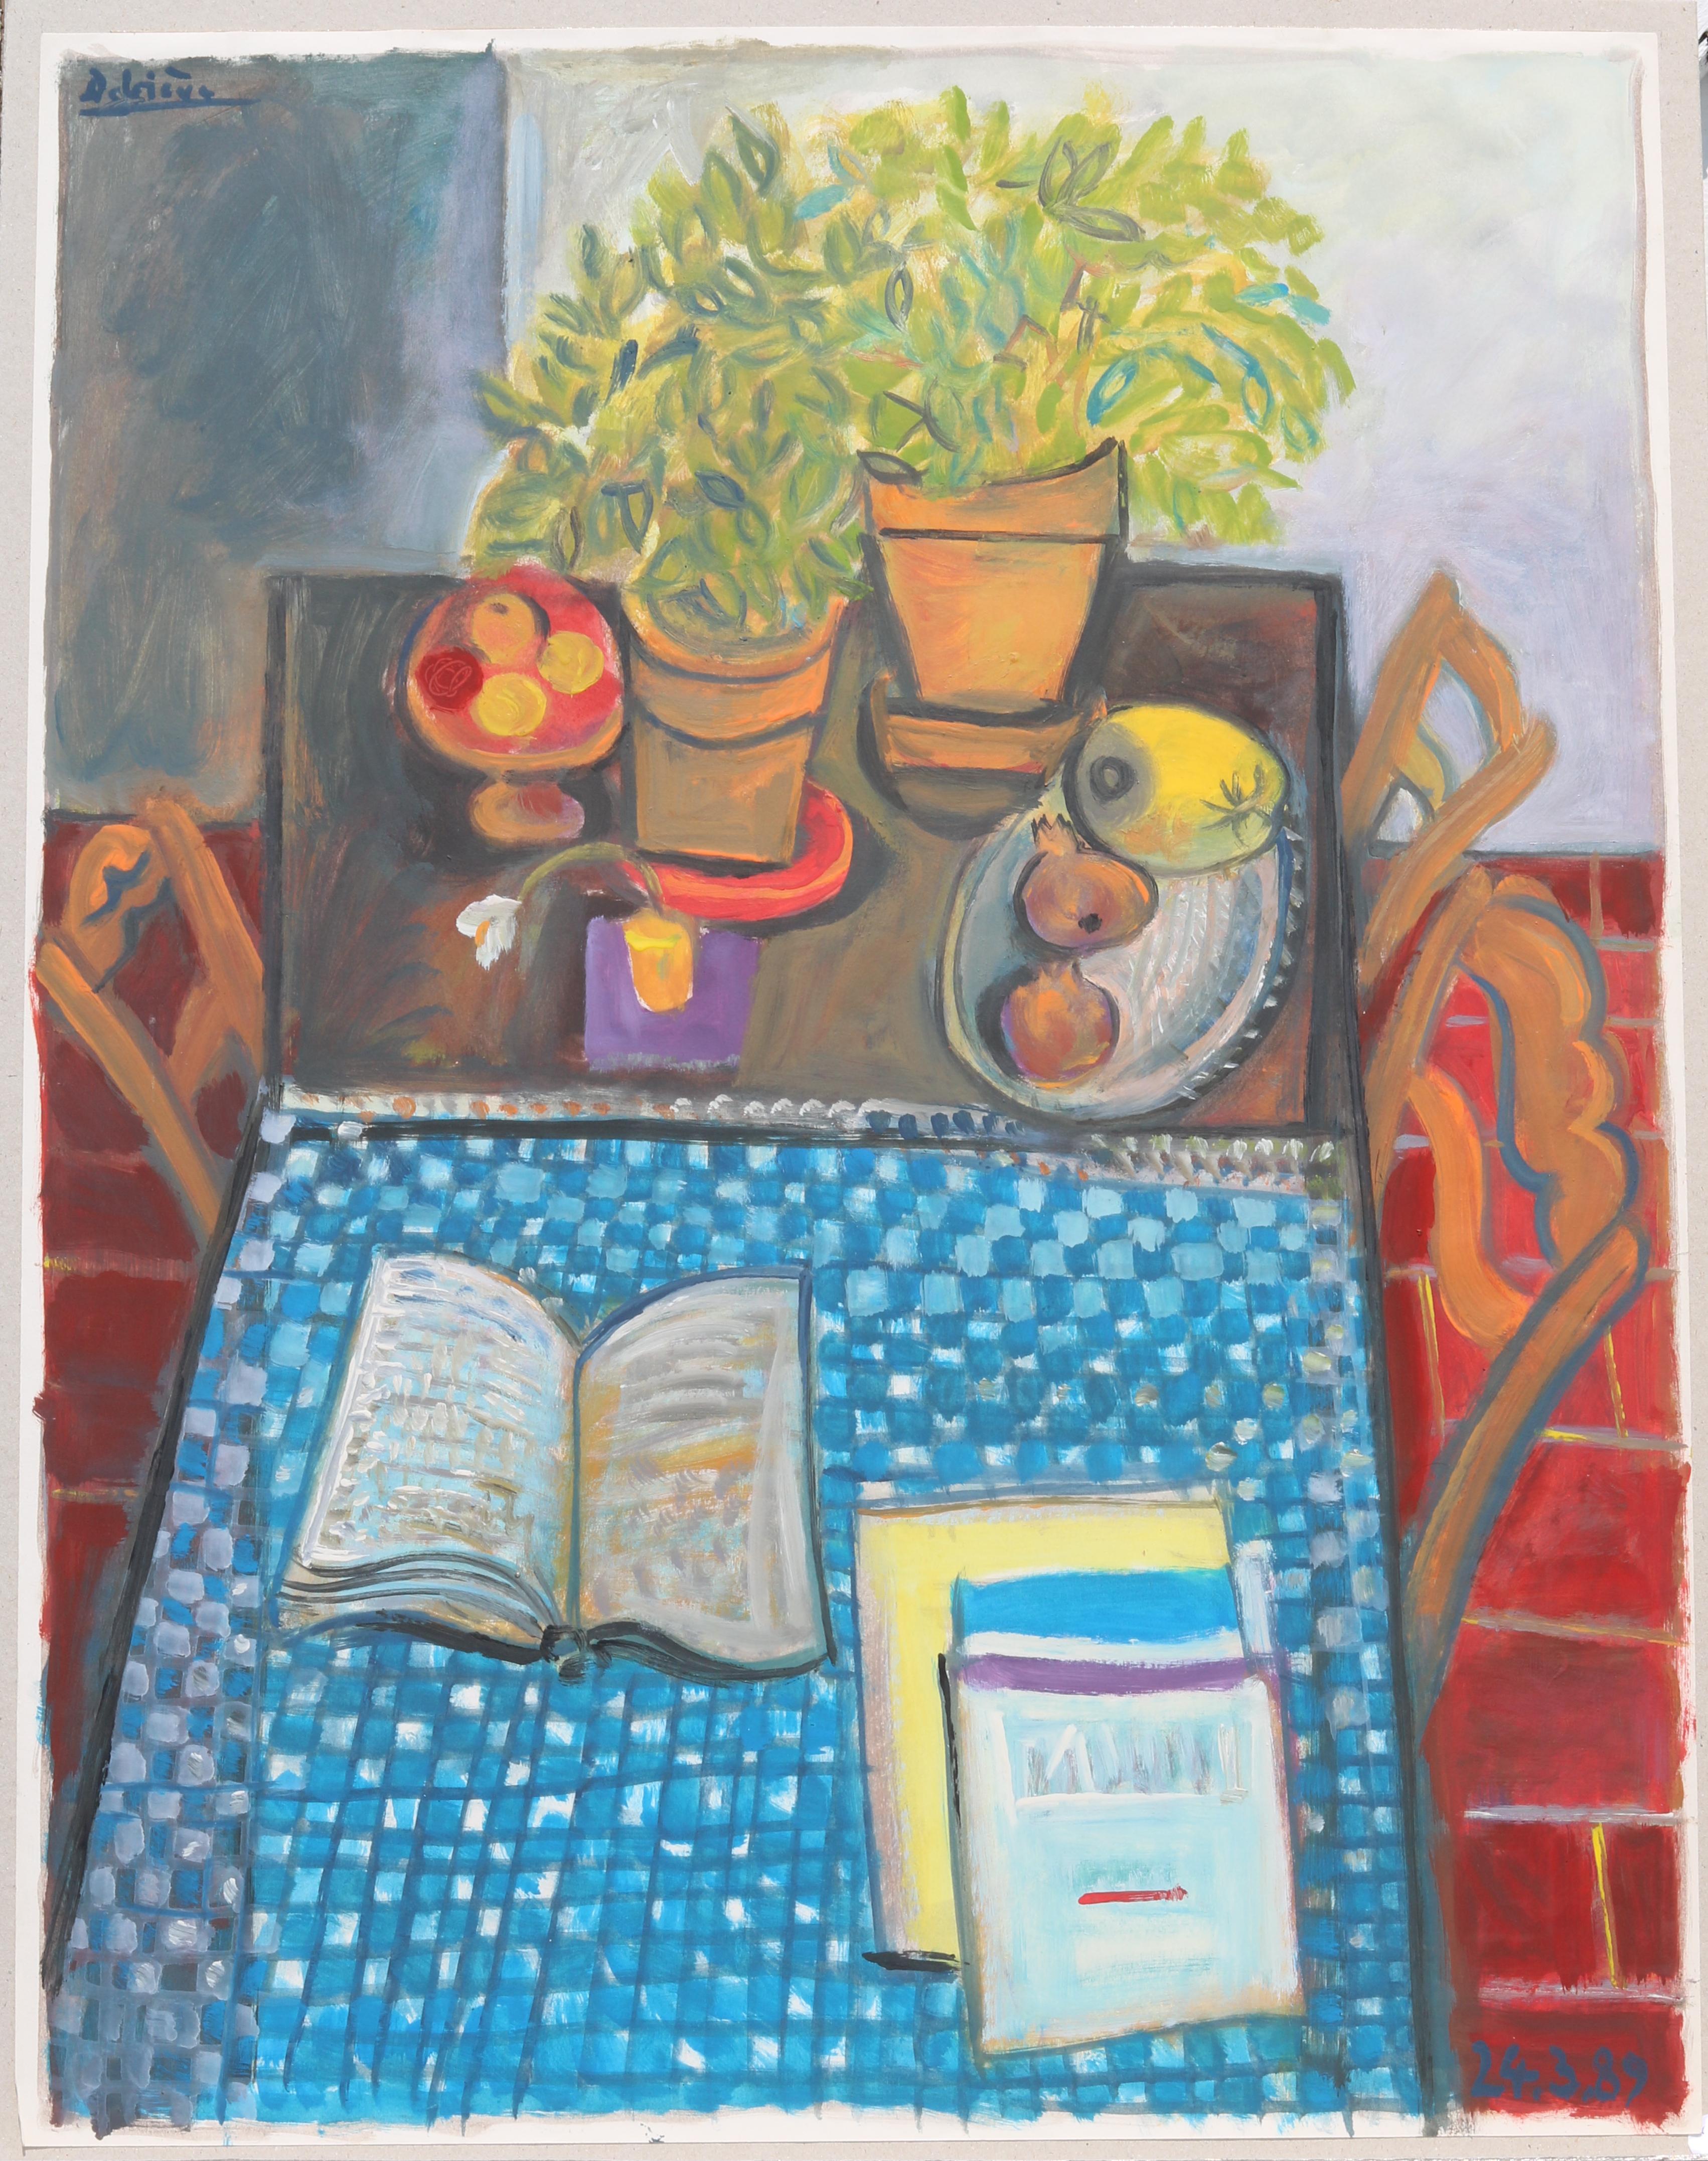 Fruits and books on a plaid tablecloth, unique piece, oil paint on paper, 1989 3